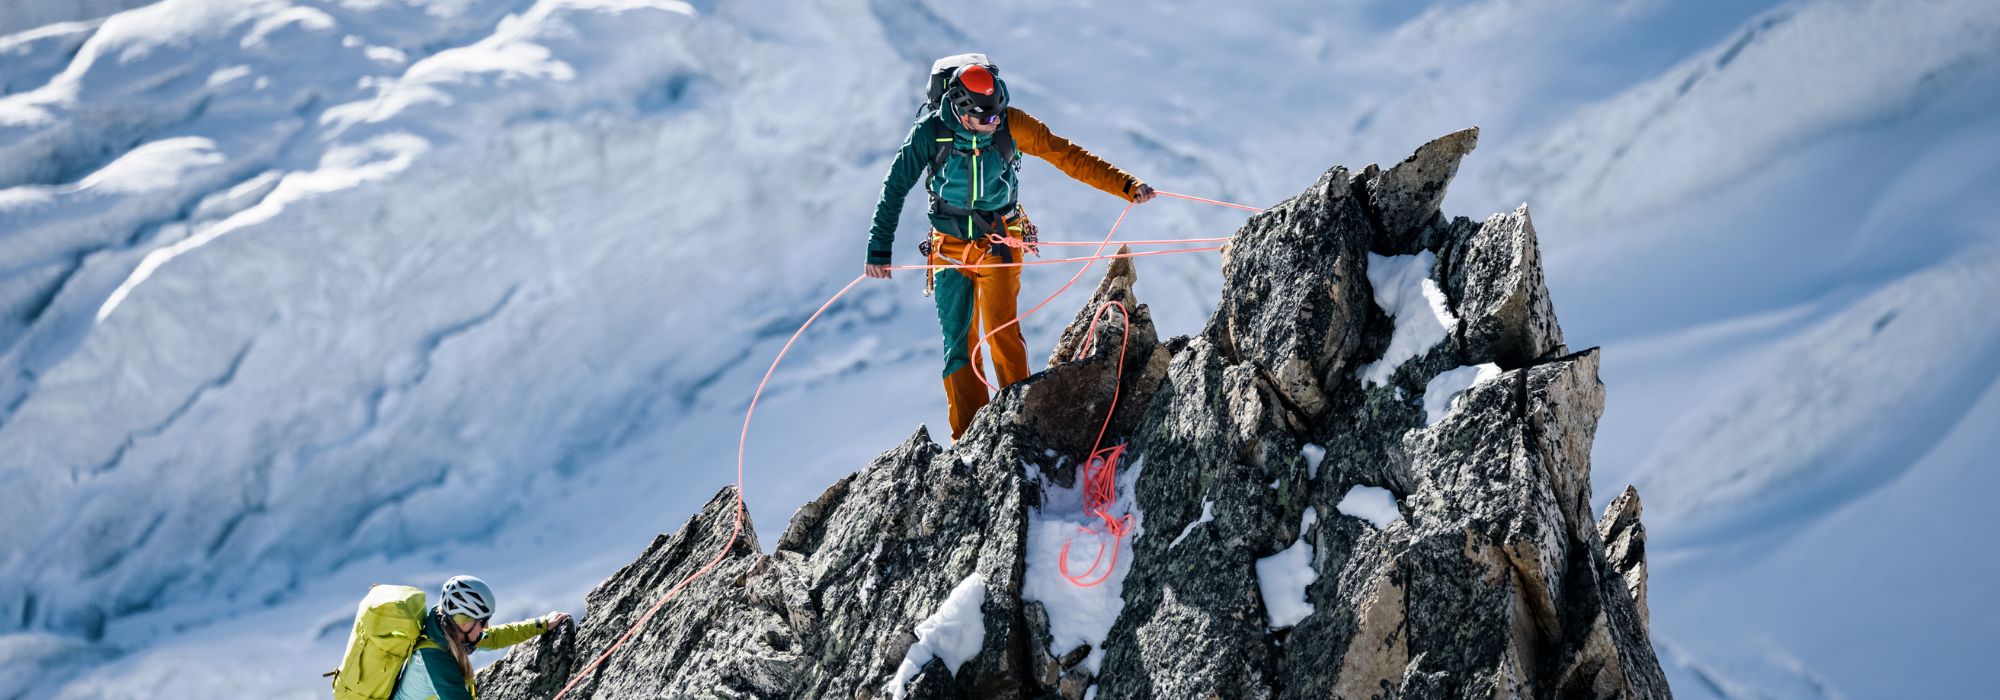 How to choose your mountaineering clothes?